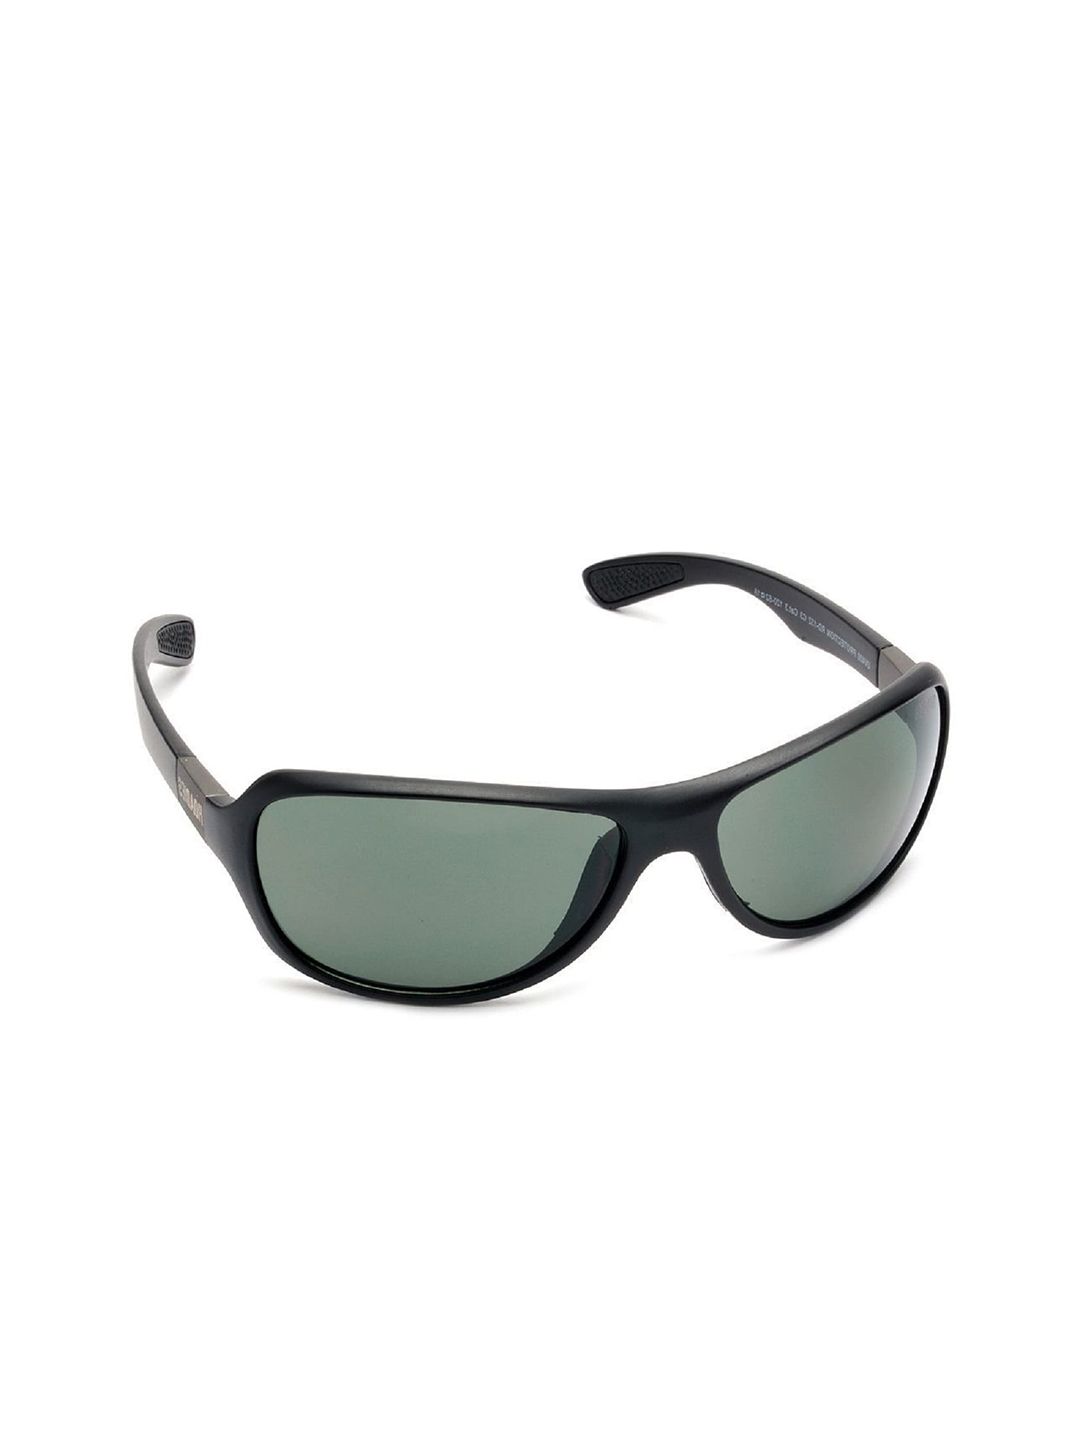 MTV Unisex Green Lens & Black Sports Sunglasses with UV Protected Lens MTV-R-132-C3 Price in India